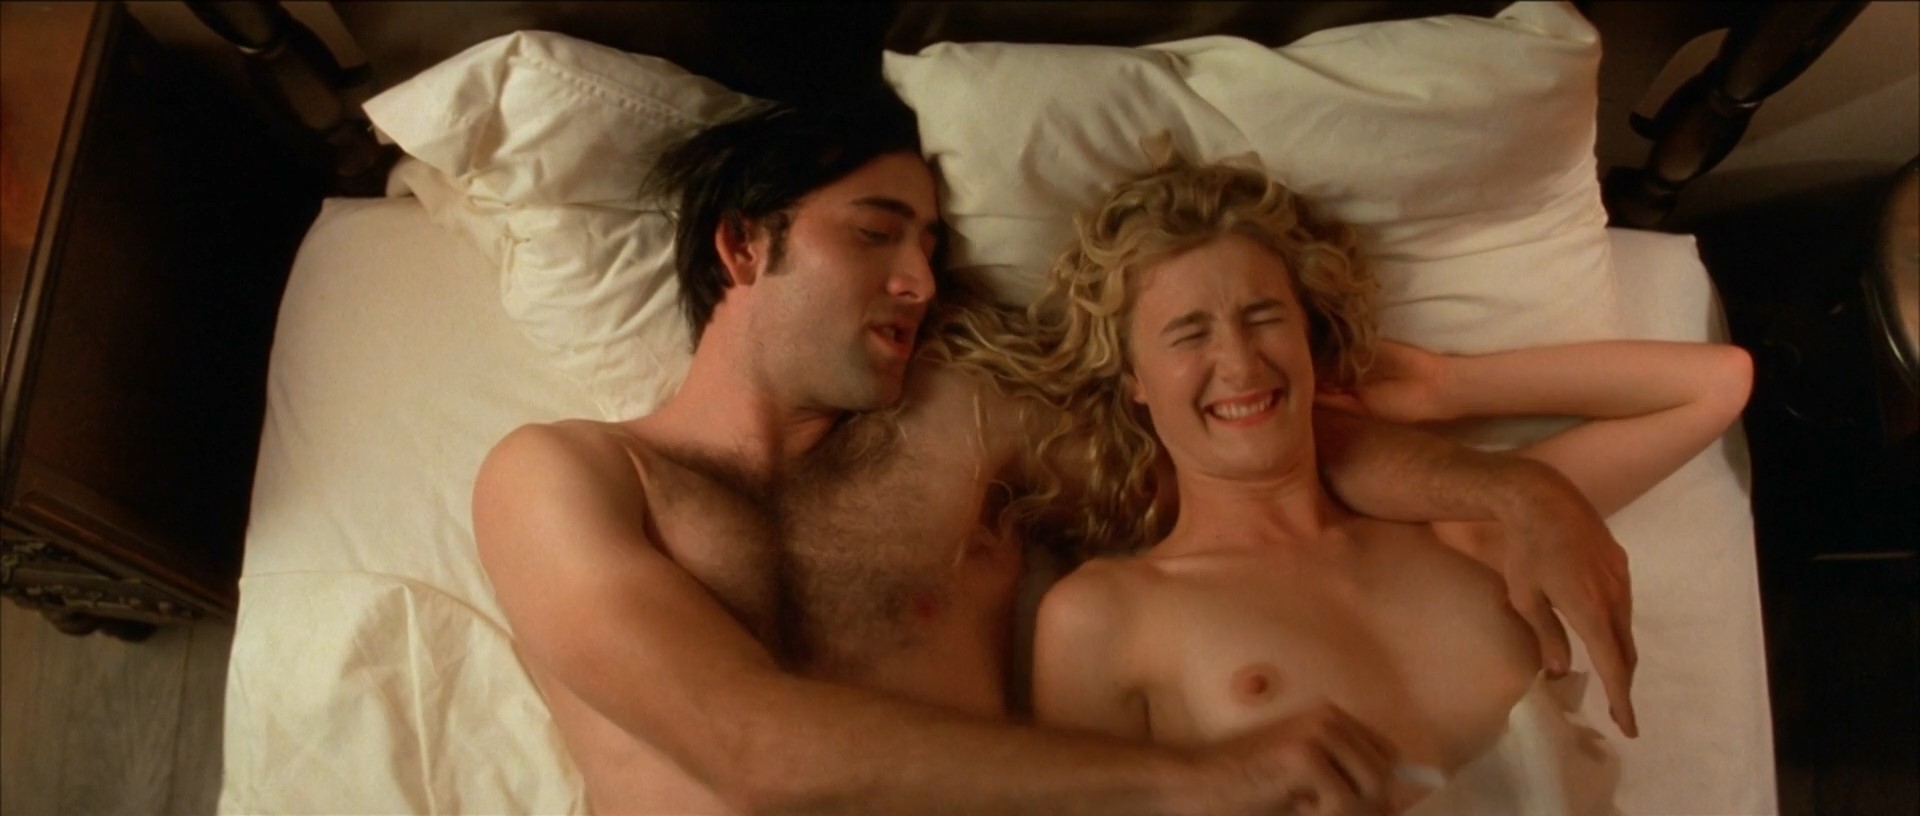 Pics naked laura dern 41 Sexiest